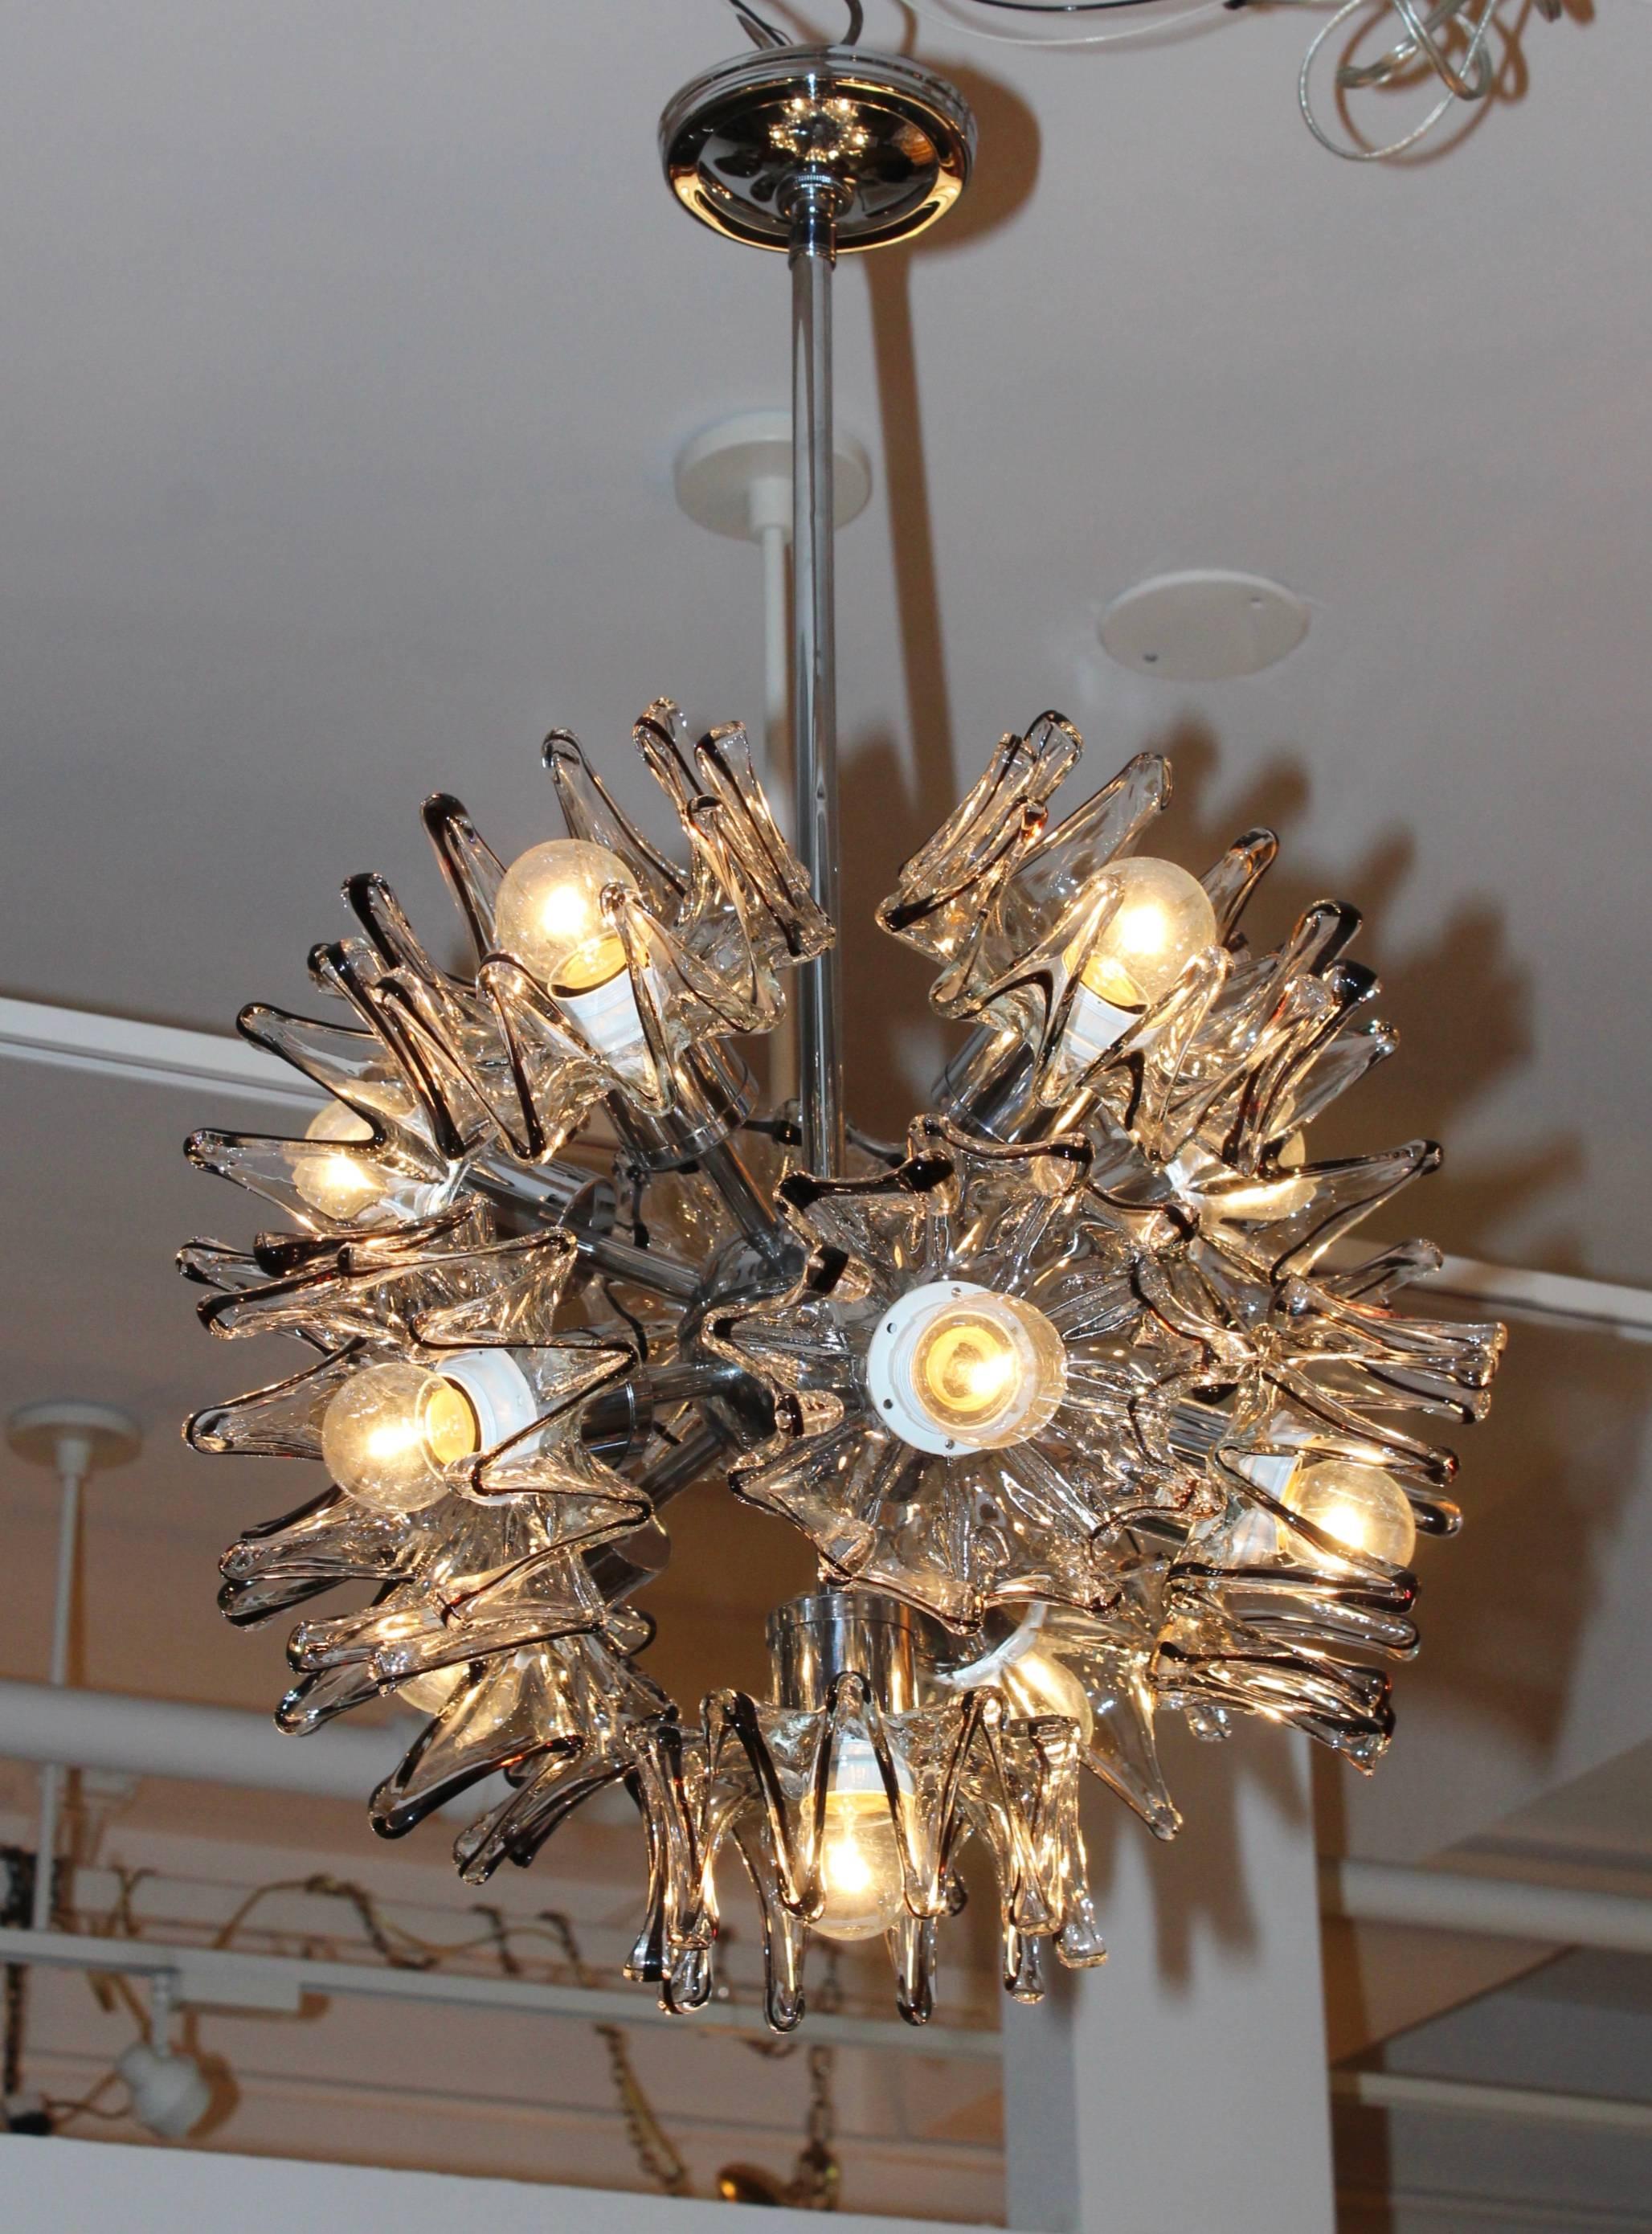 1970s Mazzega 11 lights chandelier, chrome frame with black and clear sculptural glass shades.